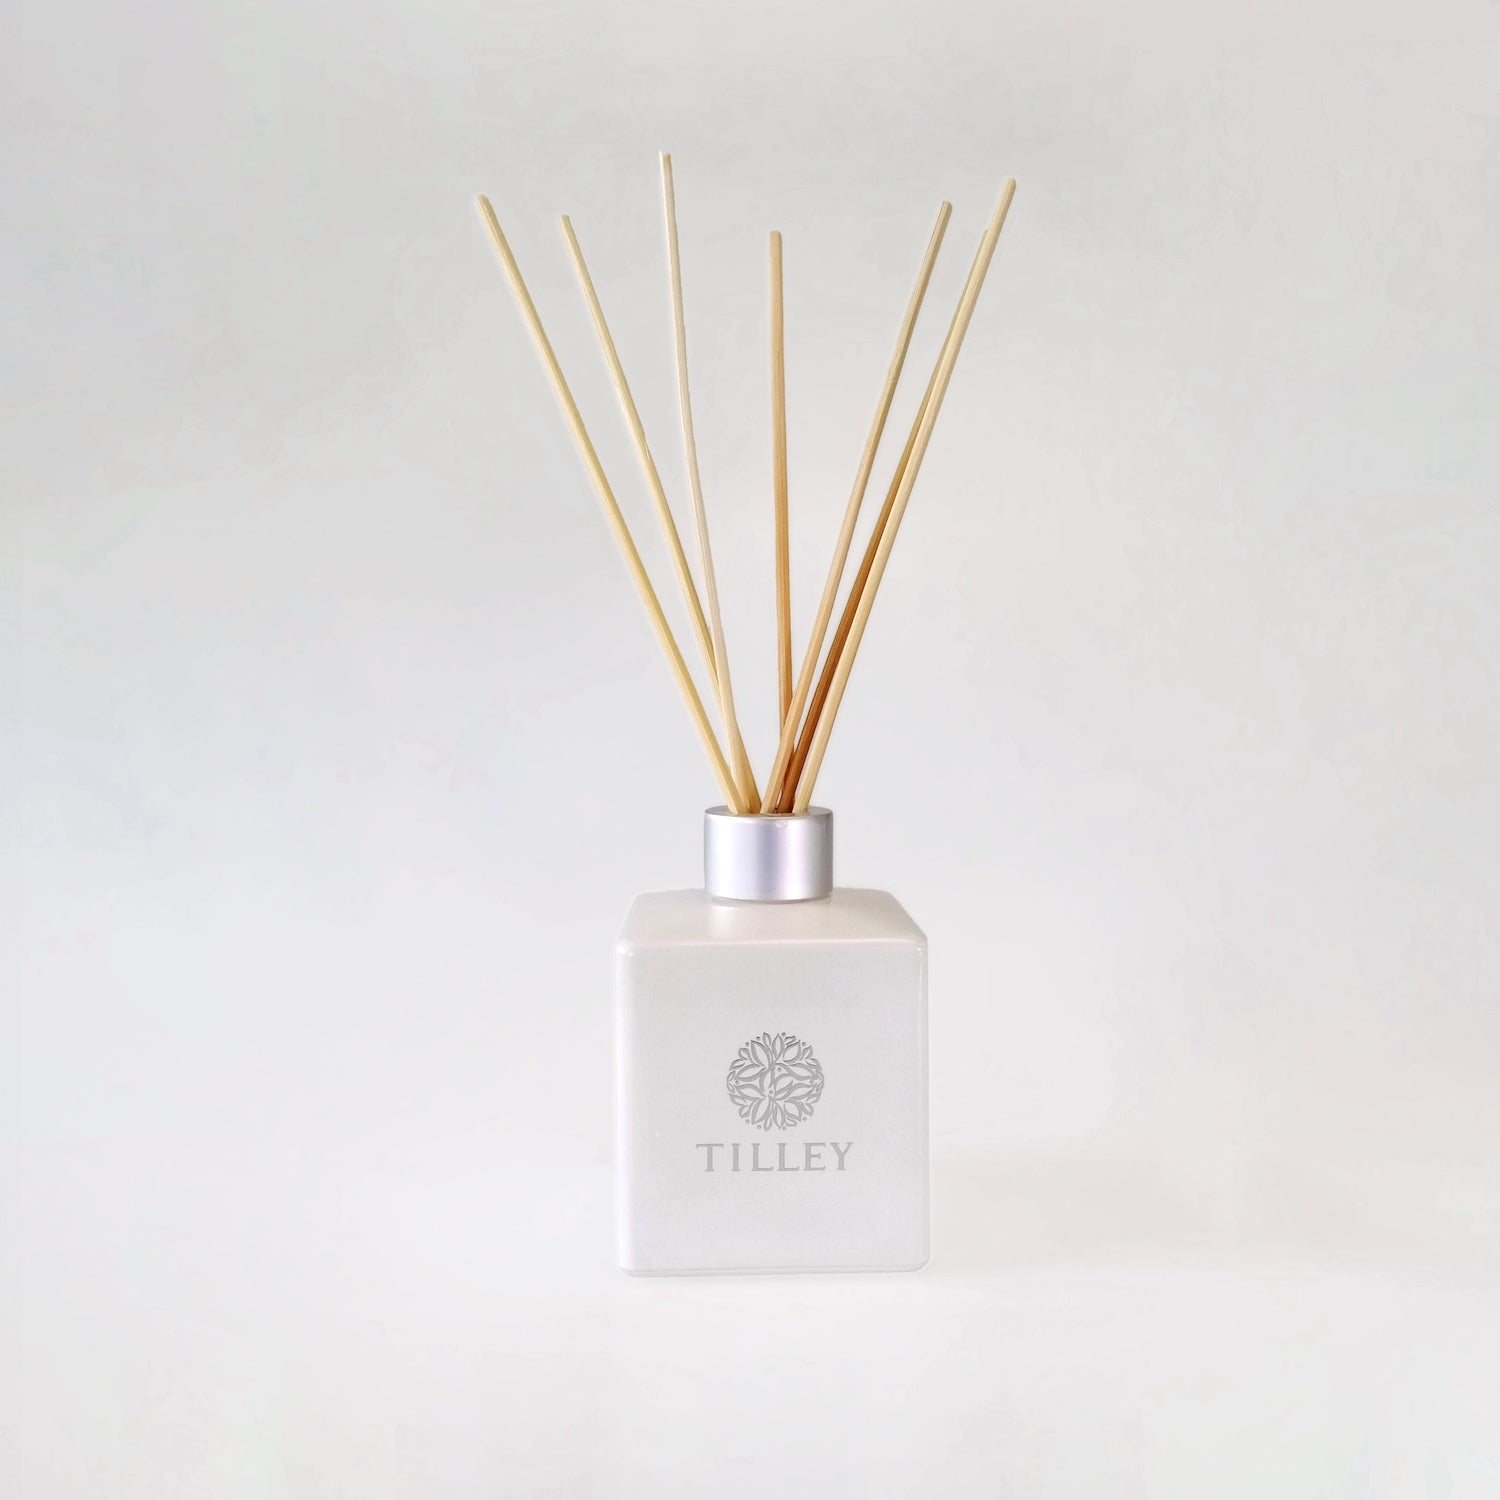 Tilley Reed Diffuser - Patchouli and Musk - 150ml